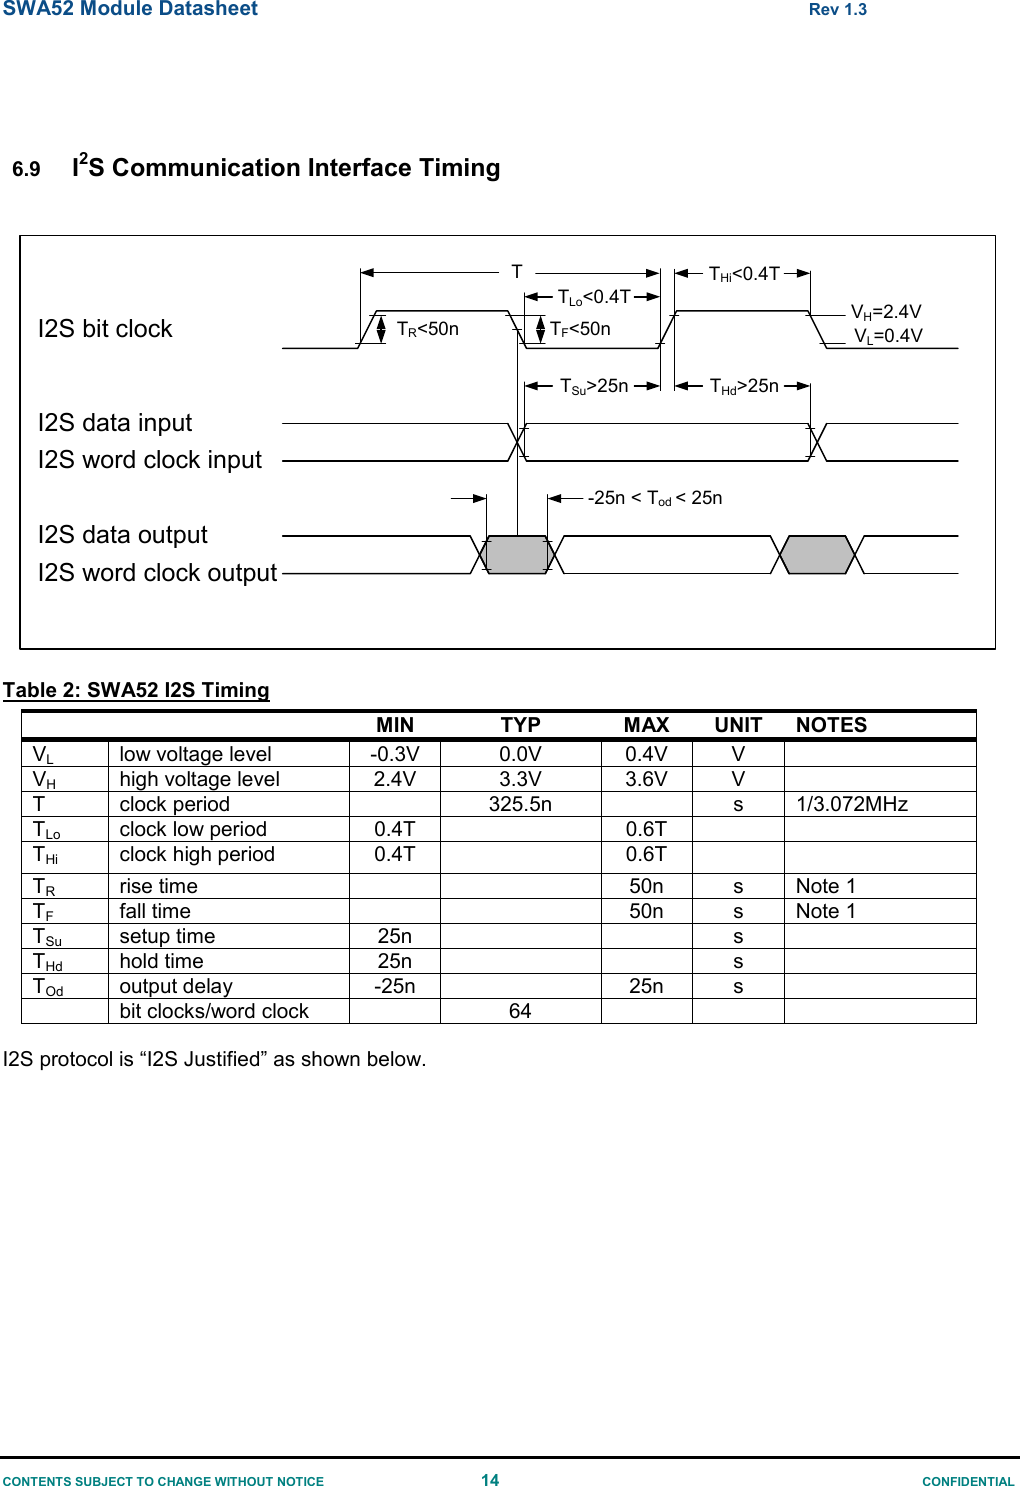 SWA52 Module Datasheet  Rev 1.3 CONTENTS SUBJECT TO CHANGE WITHOUT NOTICE  14  CONFIDENTIAL   6.9 I2S Communication Interface Timing  I2S bit clockTTHi&lt;0.4TTLo&lt;0.4T VH=2.4VVL=0.4VI2S data inputI2S word clock inputTSu&gt;25n THd&gt;25nI2S data outputI2S word clock output-25n &lt; Tod &lt; 25nTR&lt;50n TF&lt;50n Table 2: SWA52 I2S Timing    MIN TYP MAX UNIT NOTES VL  low voltage level -0.3V 0.0V 0.4V V  VH  high voltage level 2.4V 3.3V 3.6V V  T  clock period  325.5n  s 1/3.072MHz TLo  clock low period 0.4T  0.6T   THi  clock high period 0.4T  0.6T   TR  rise time   50n s Note 1 TF  fall time   50n s Note 1 TSu  setup time 25n   s  THd  hold time 25n   s  TOd  output delay -25n  25n s   bit clocks/word clock  64     I2S protocol is “I2S Justified” as shown below. 